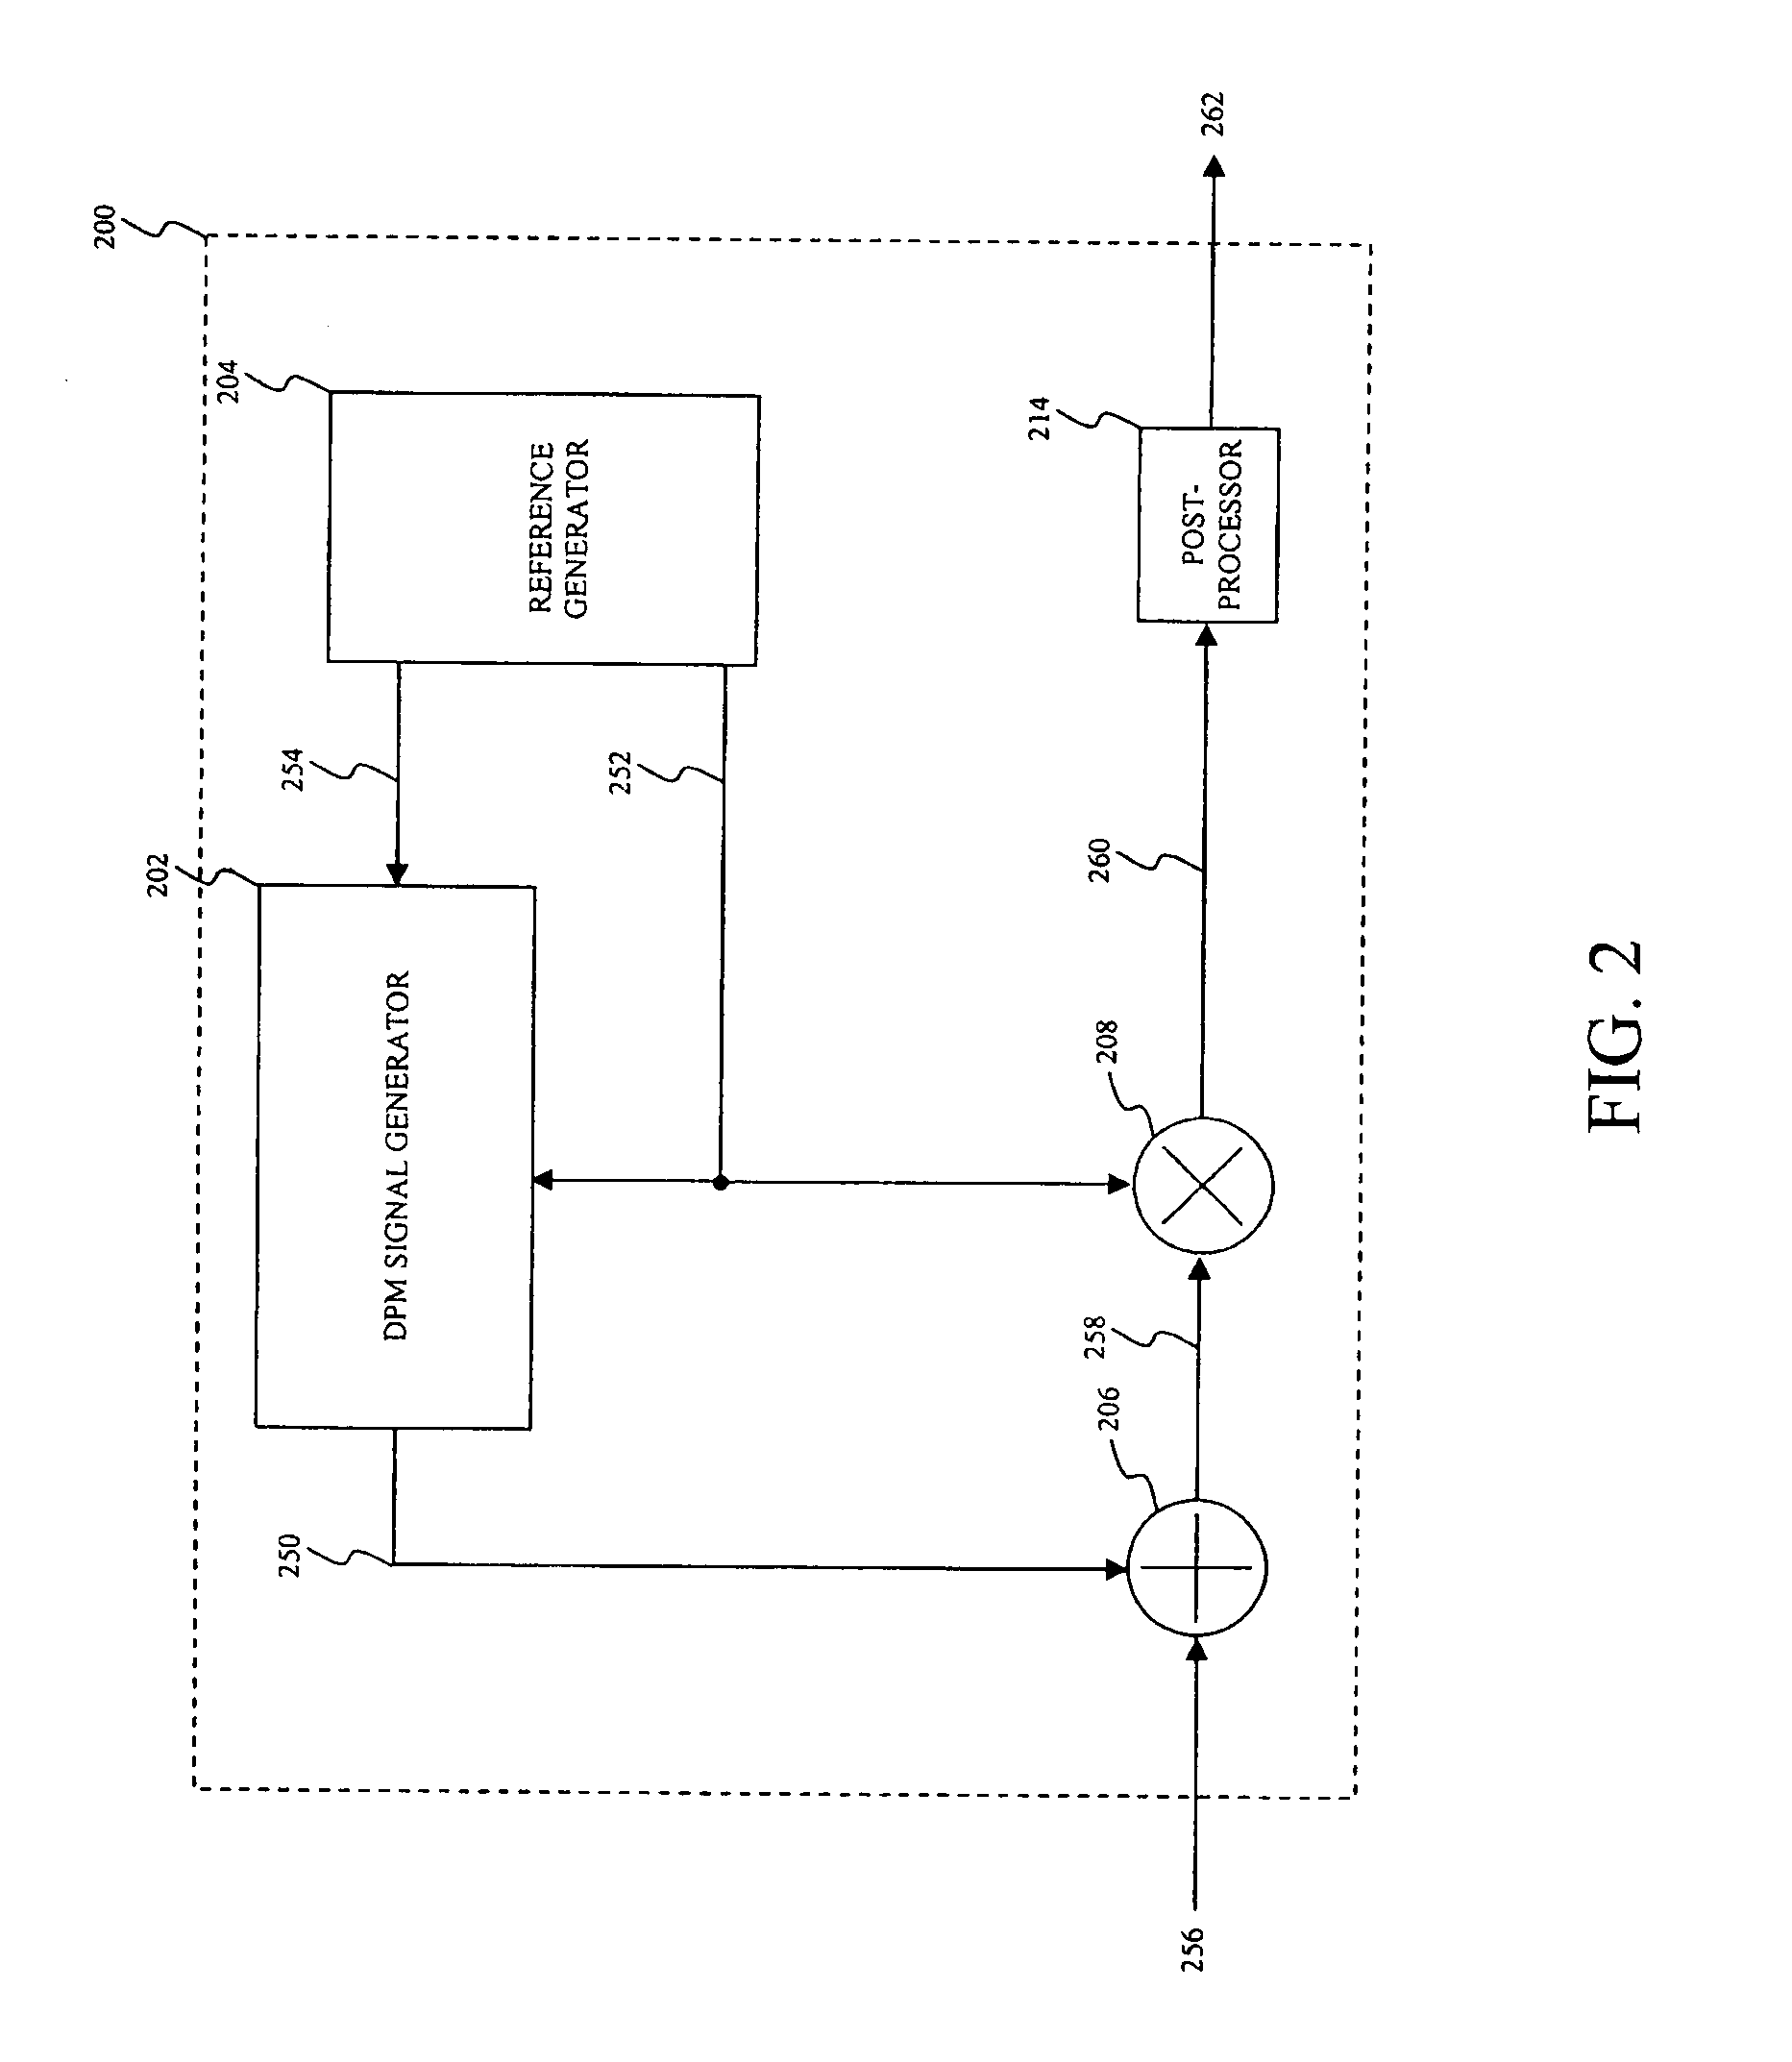 Apparatus and method for downstream power management in a cable system